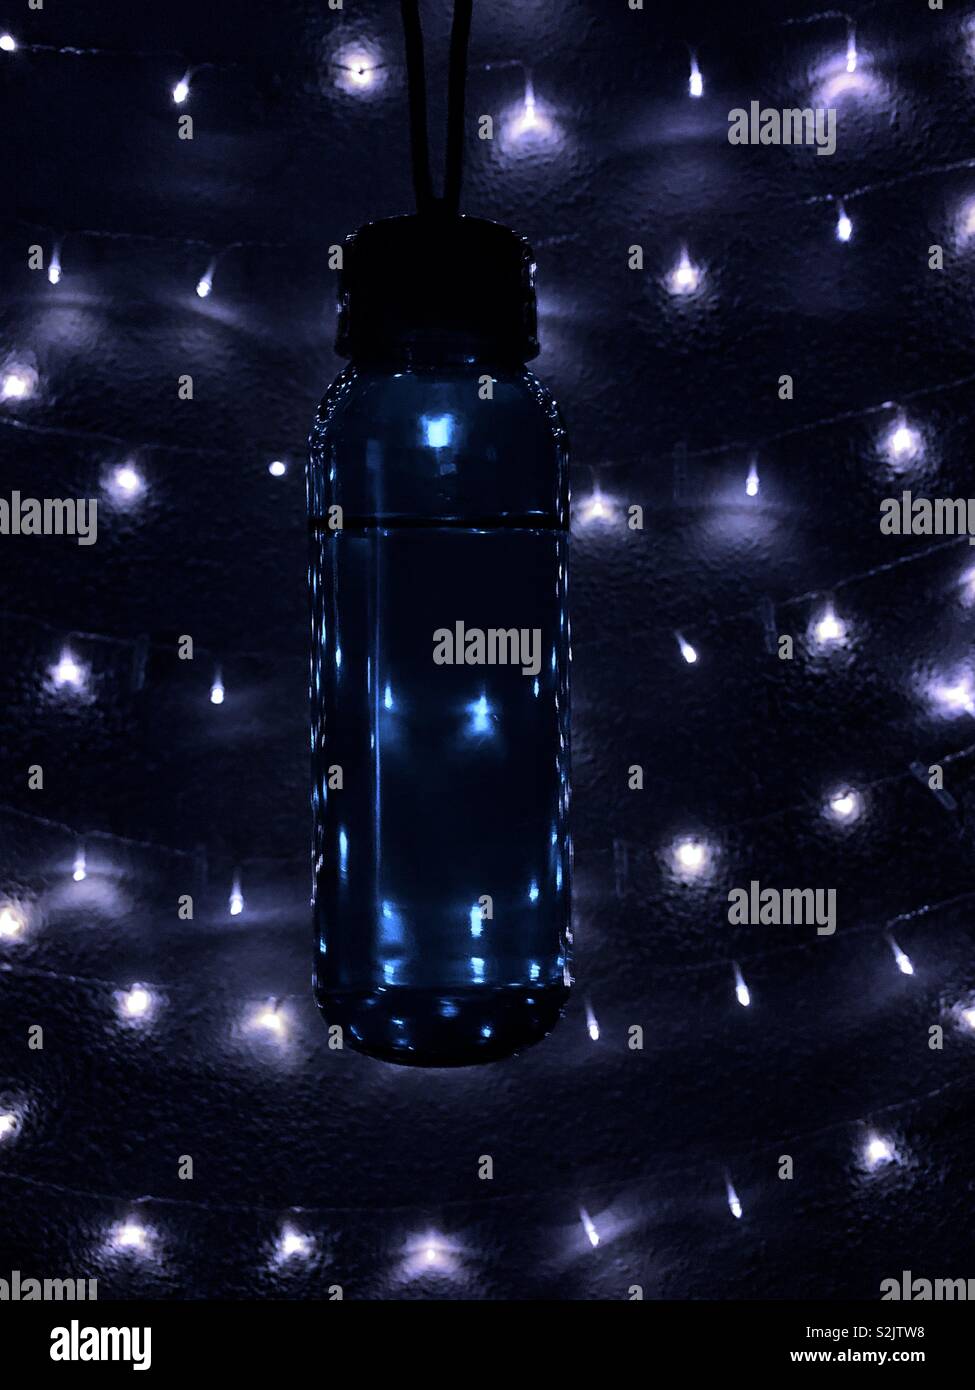 Background. Abstract and cold. A bottle of water in a space full of decorative lighting Stock Photo